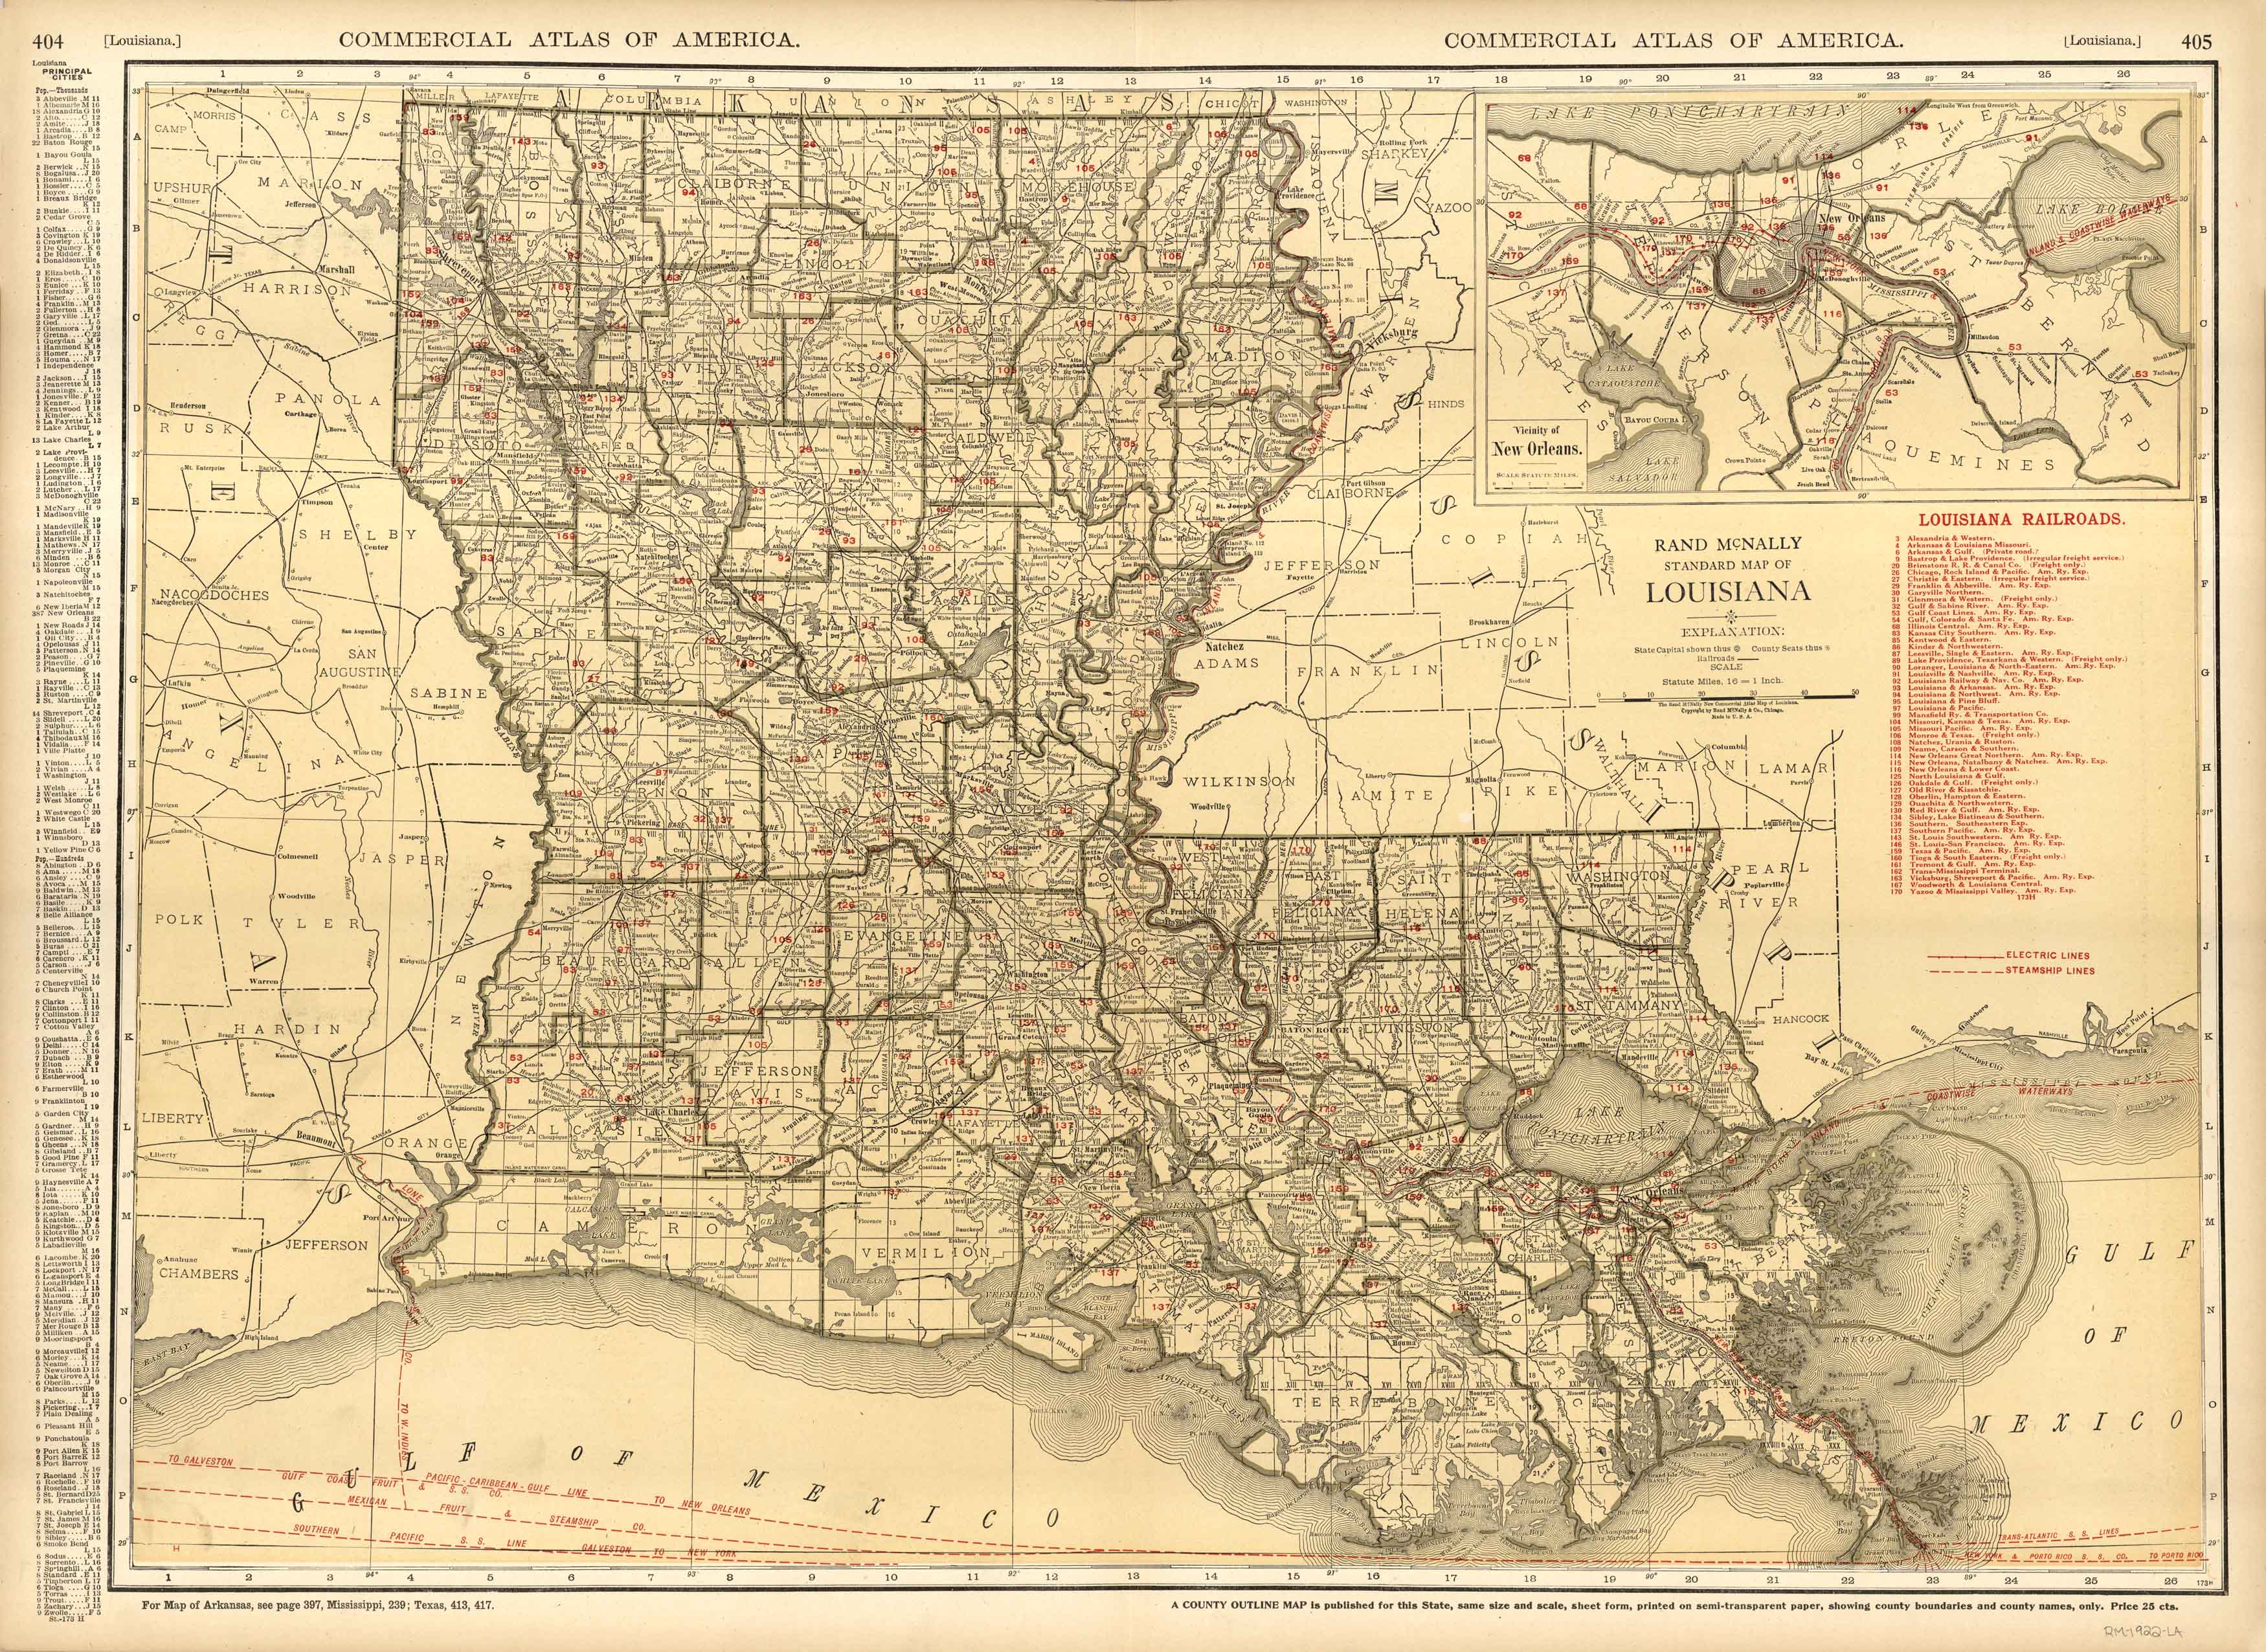 Map of Louisiana, Mississippi, and Arkansas by LOUISIANA -- MISSISSIPPI --  ARKANSAS -- Map on Main Street Fine Books & Manuscripts